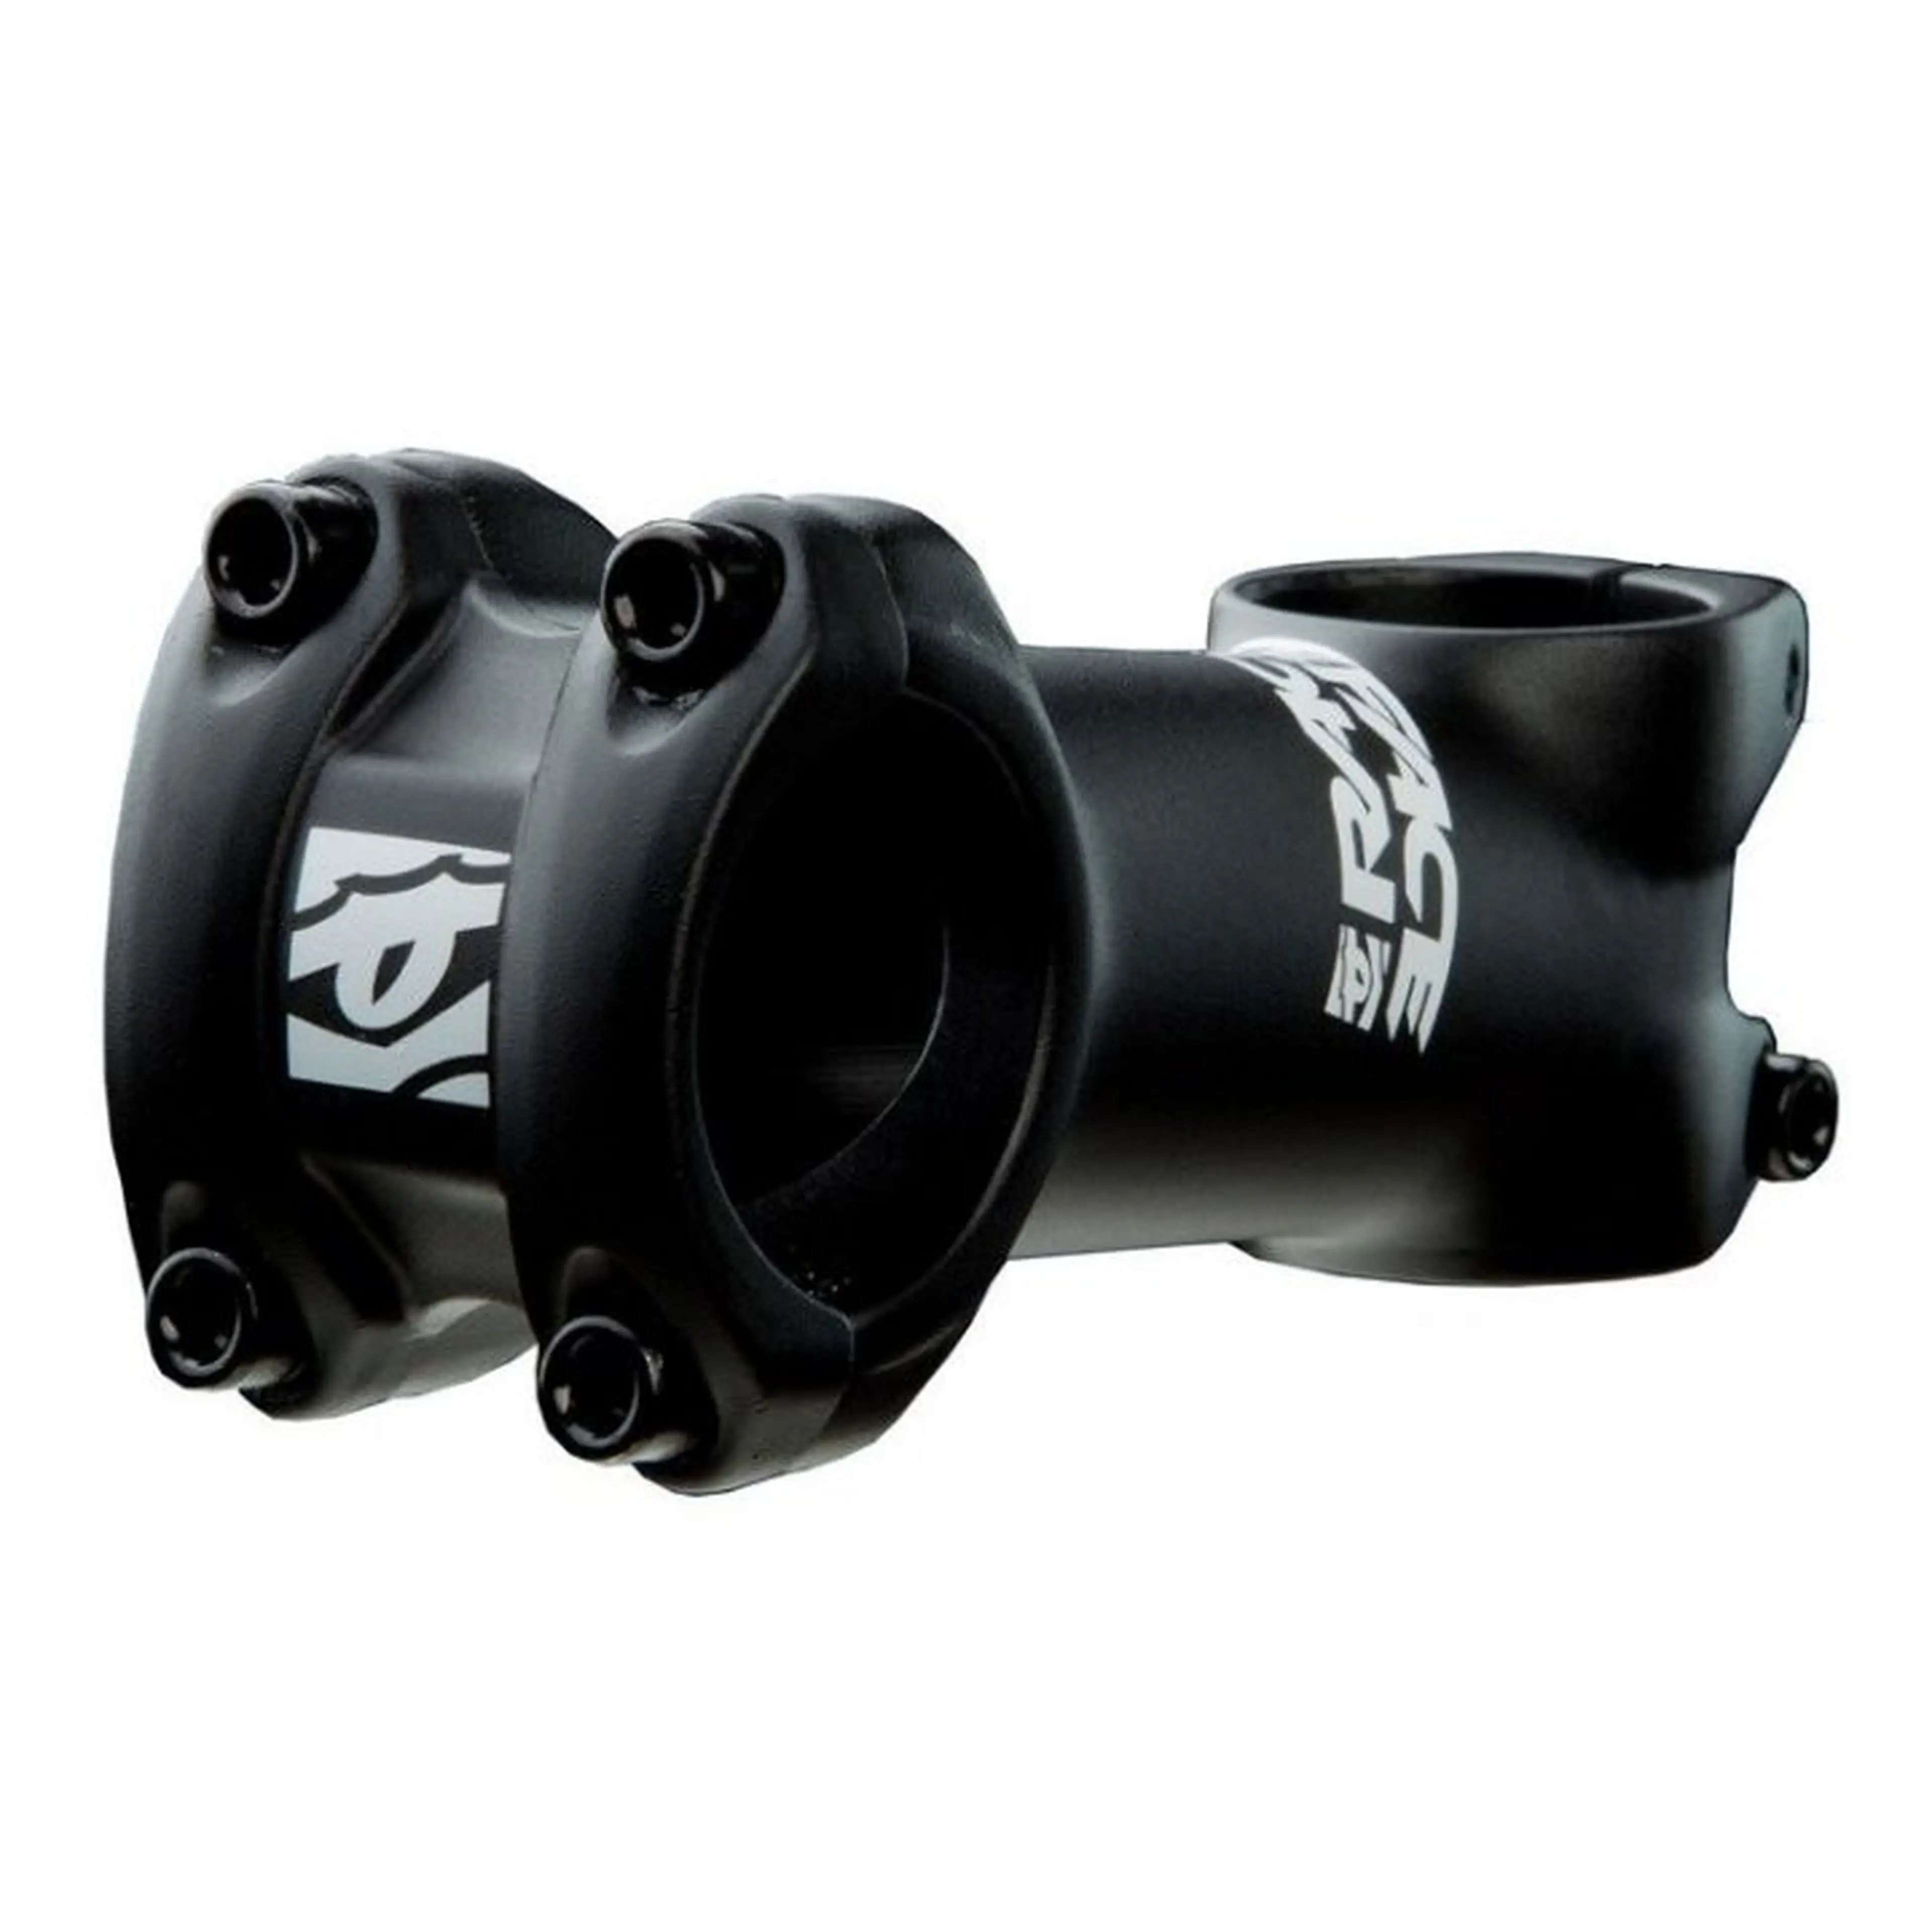 3. Pipe Race Face Ride XC prindere 31.8mm noi